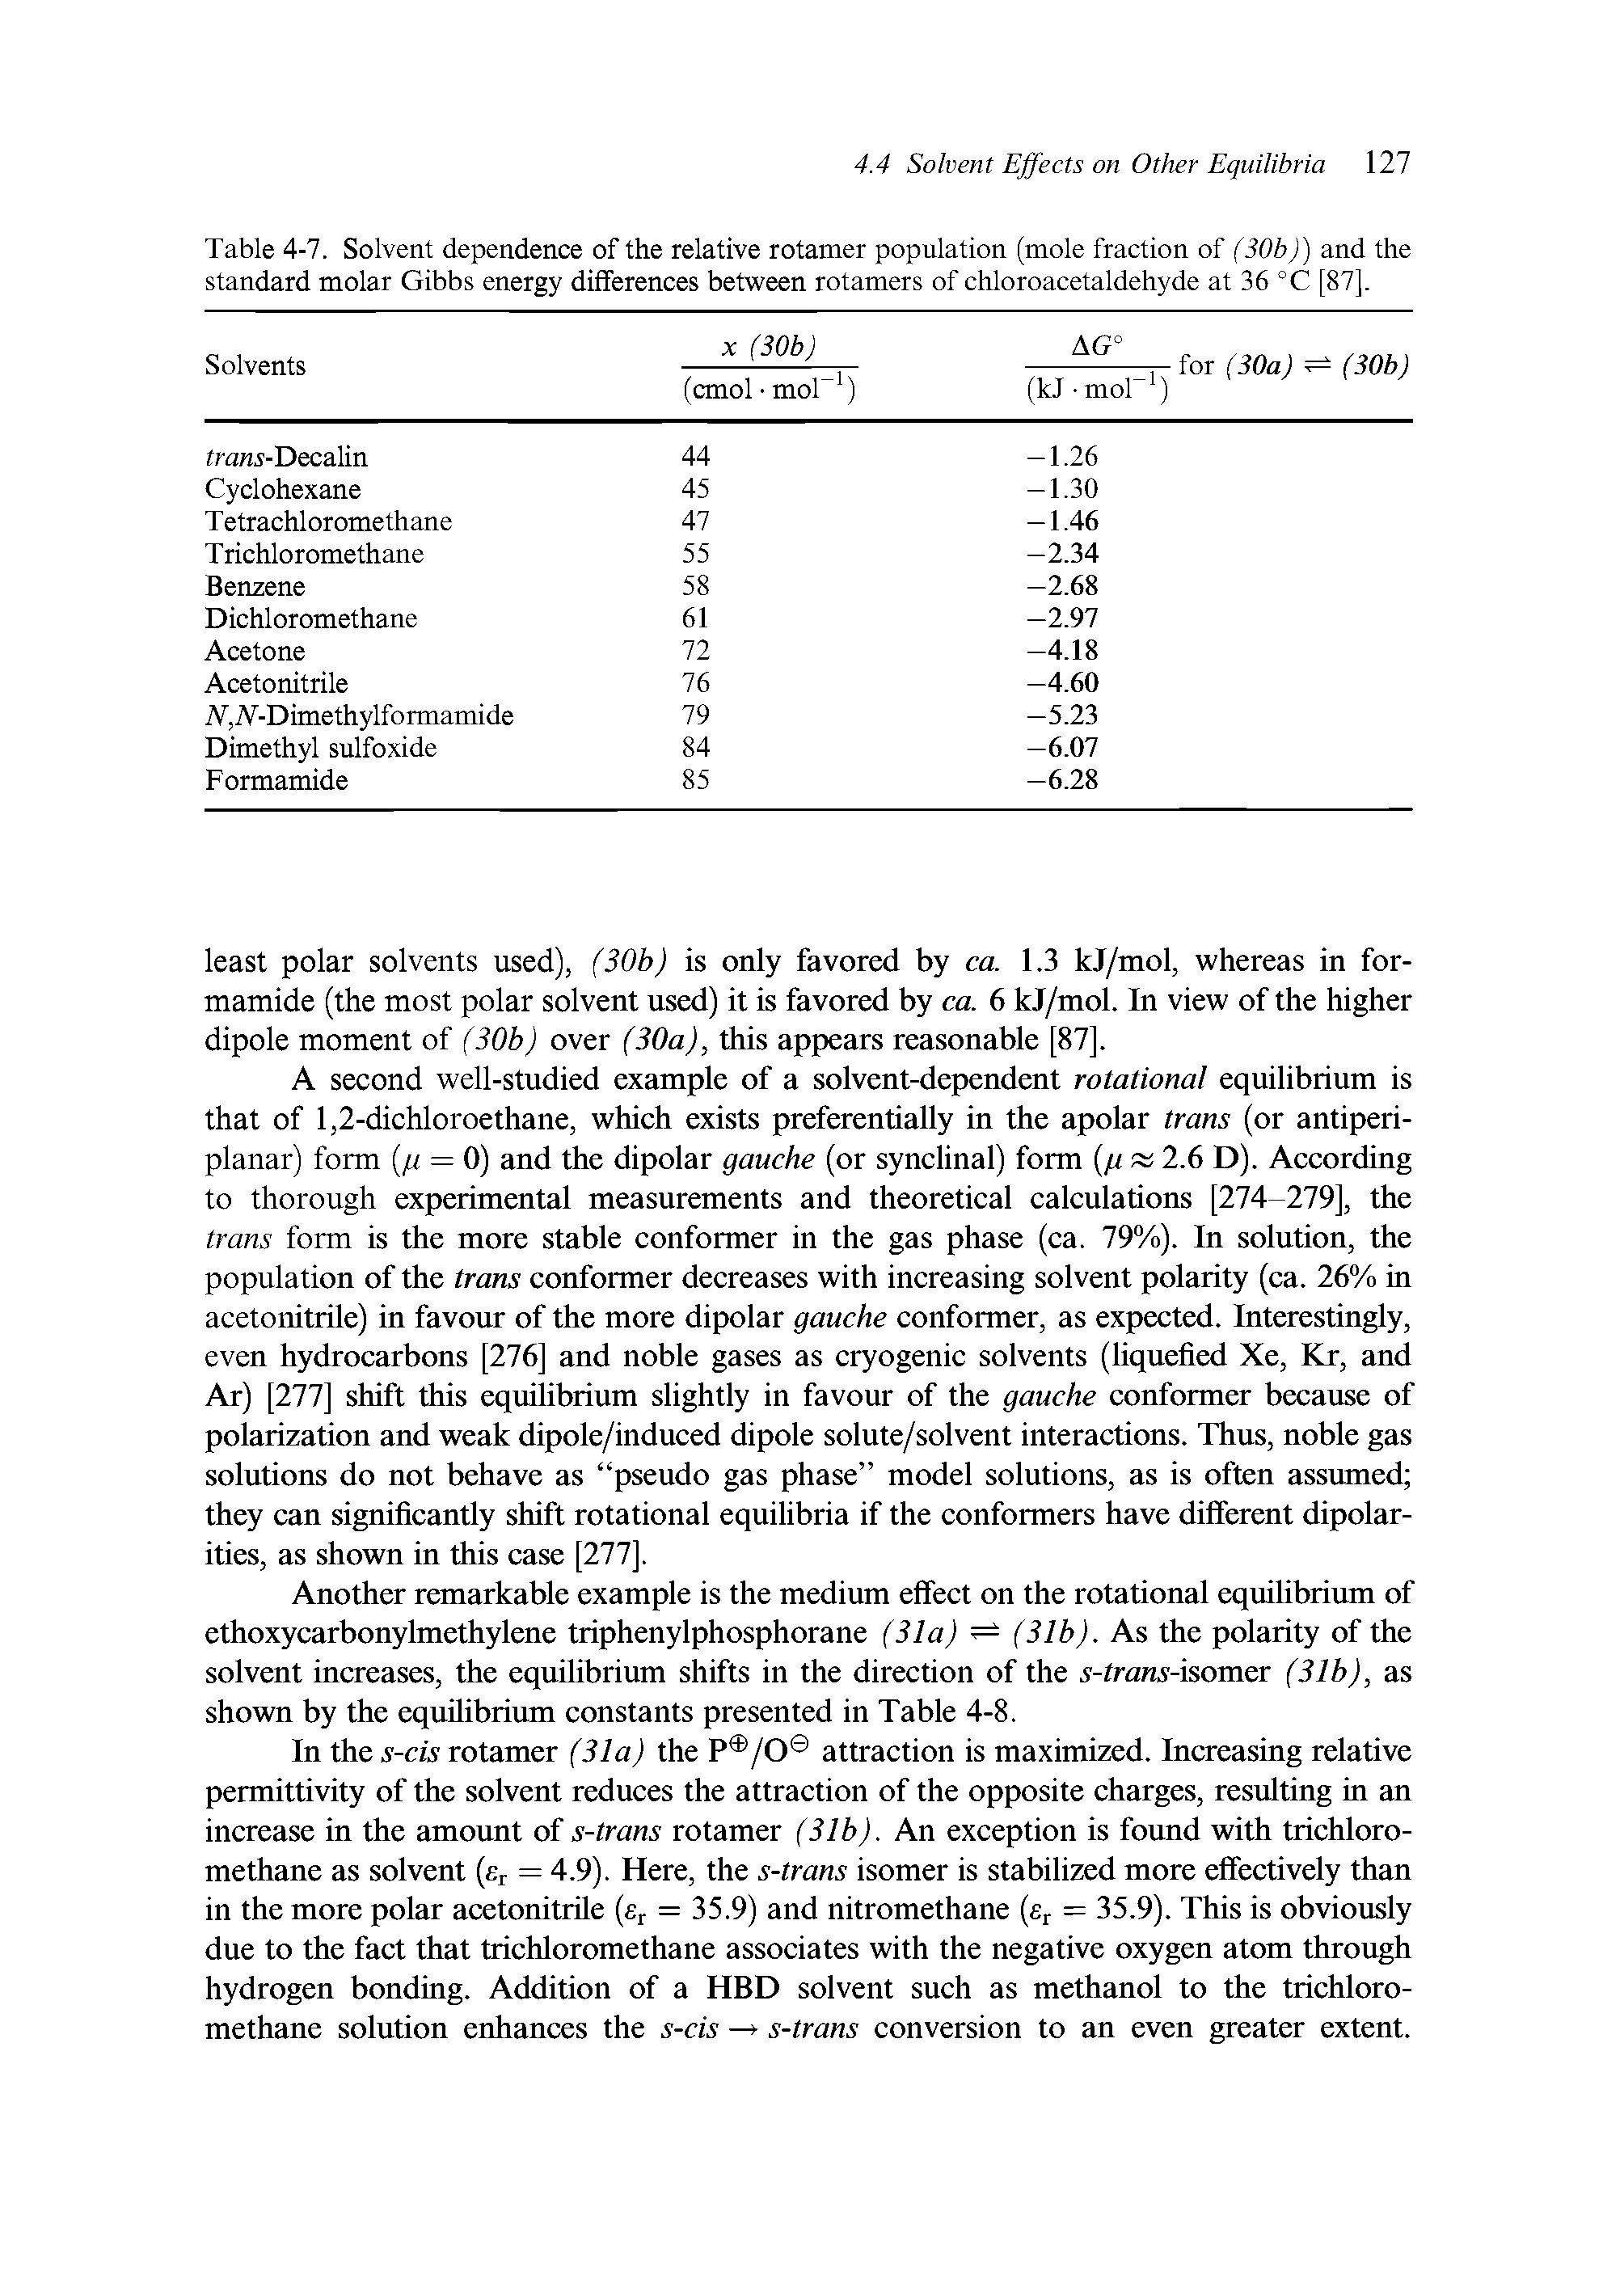 Table 4-7. Solvent dependence of the relative rotamer population (mole fraction of (30b)) and the standard molar Gibbs energy differences between rotamers of chloroacetaldehyde at 36 °C [87],...